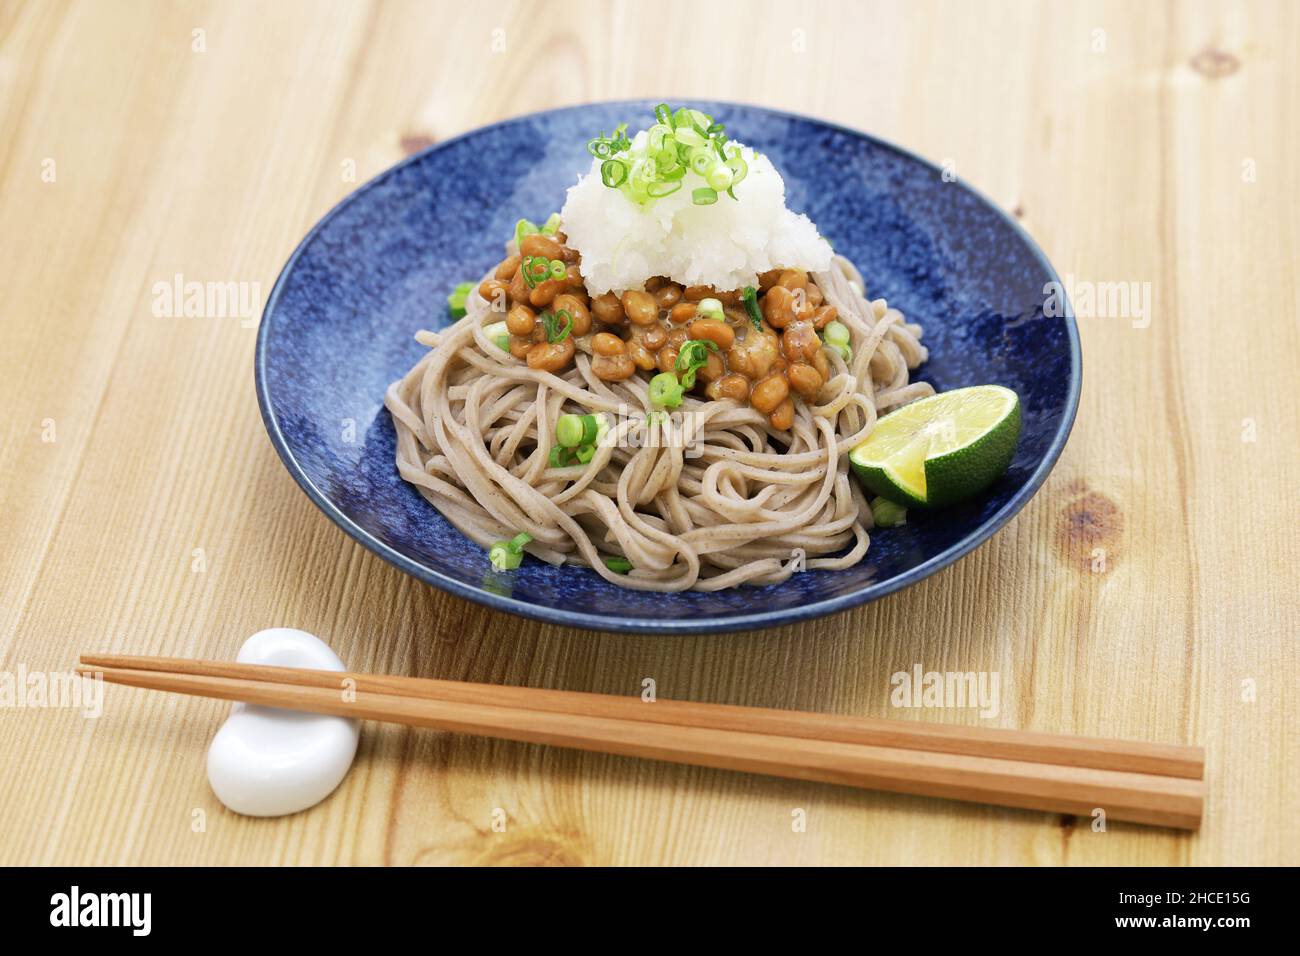 soba ( buckwheat noodles ) with natto (fermented soybeans) and grated daikon radish, Japanese food Stock Photo